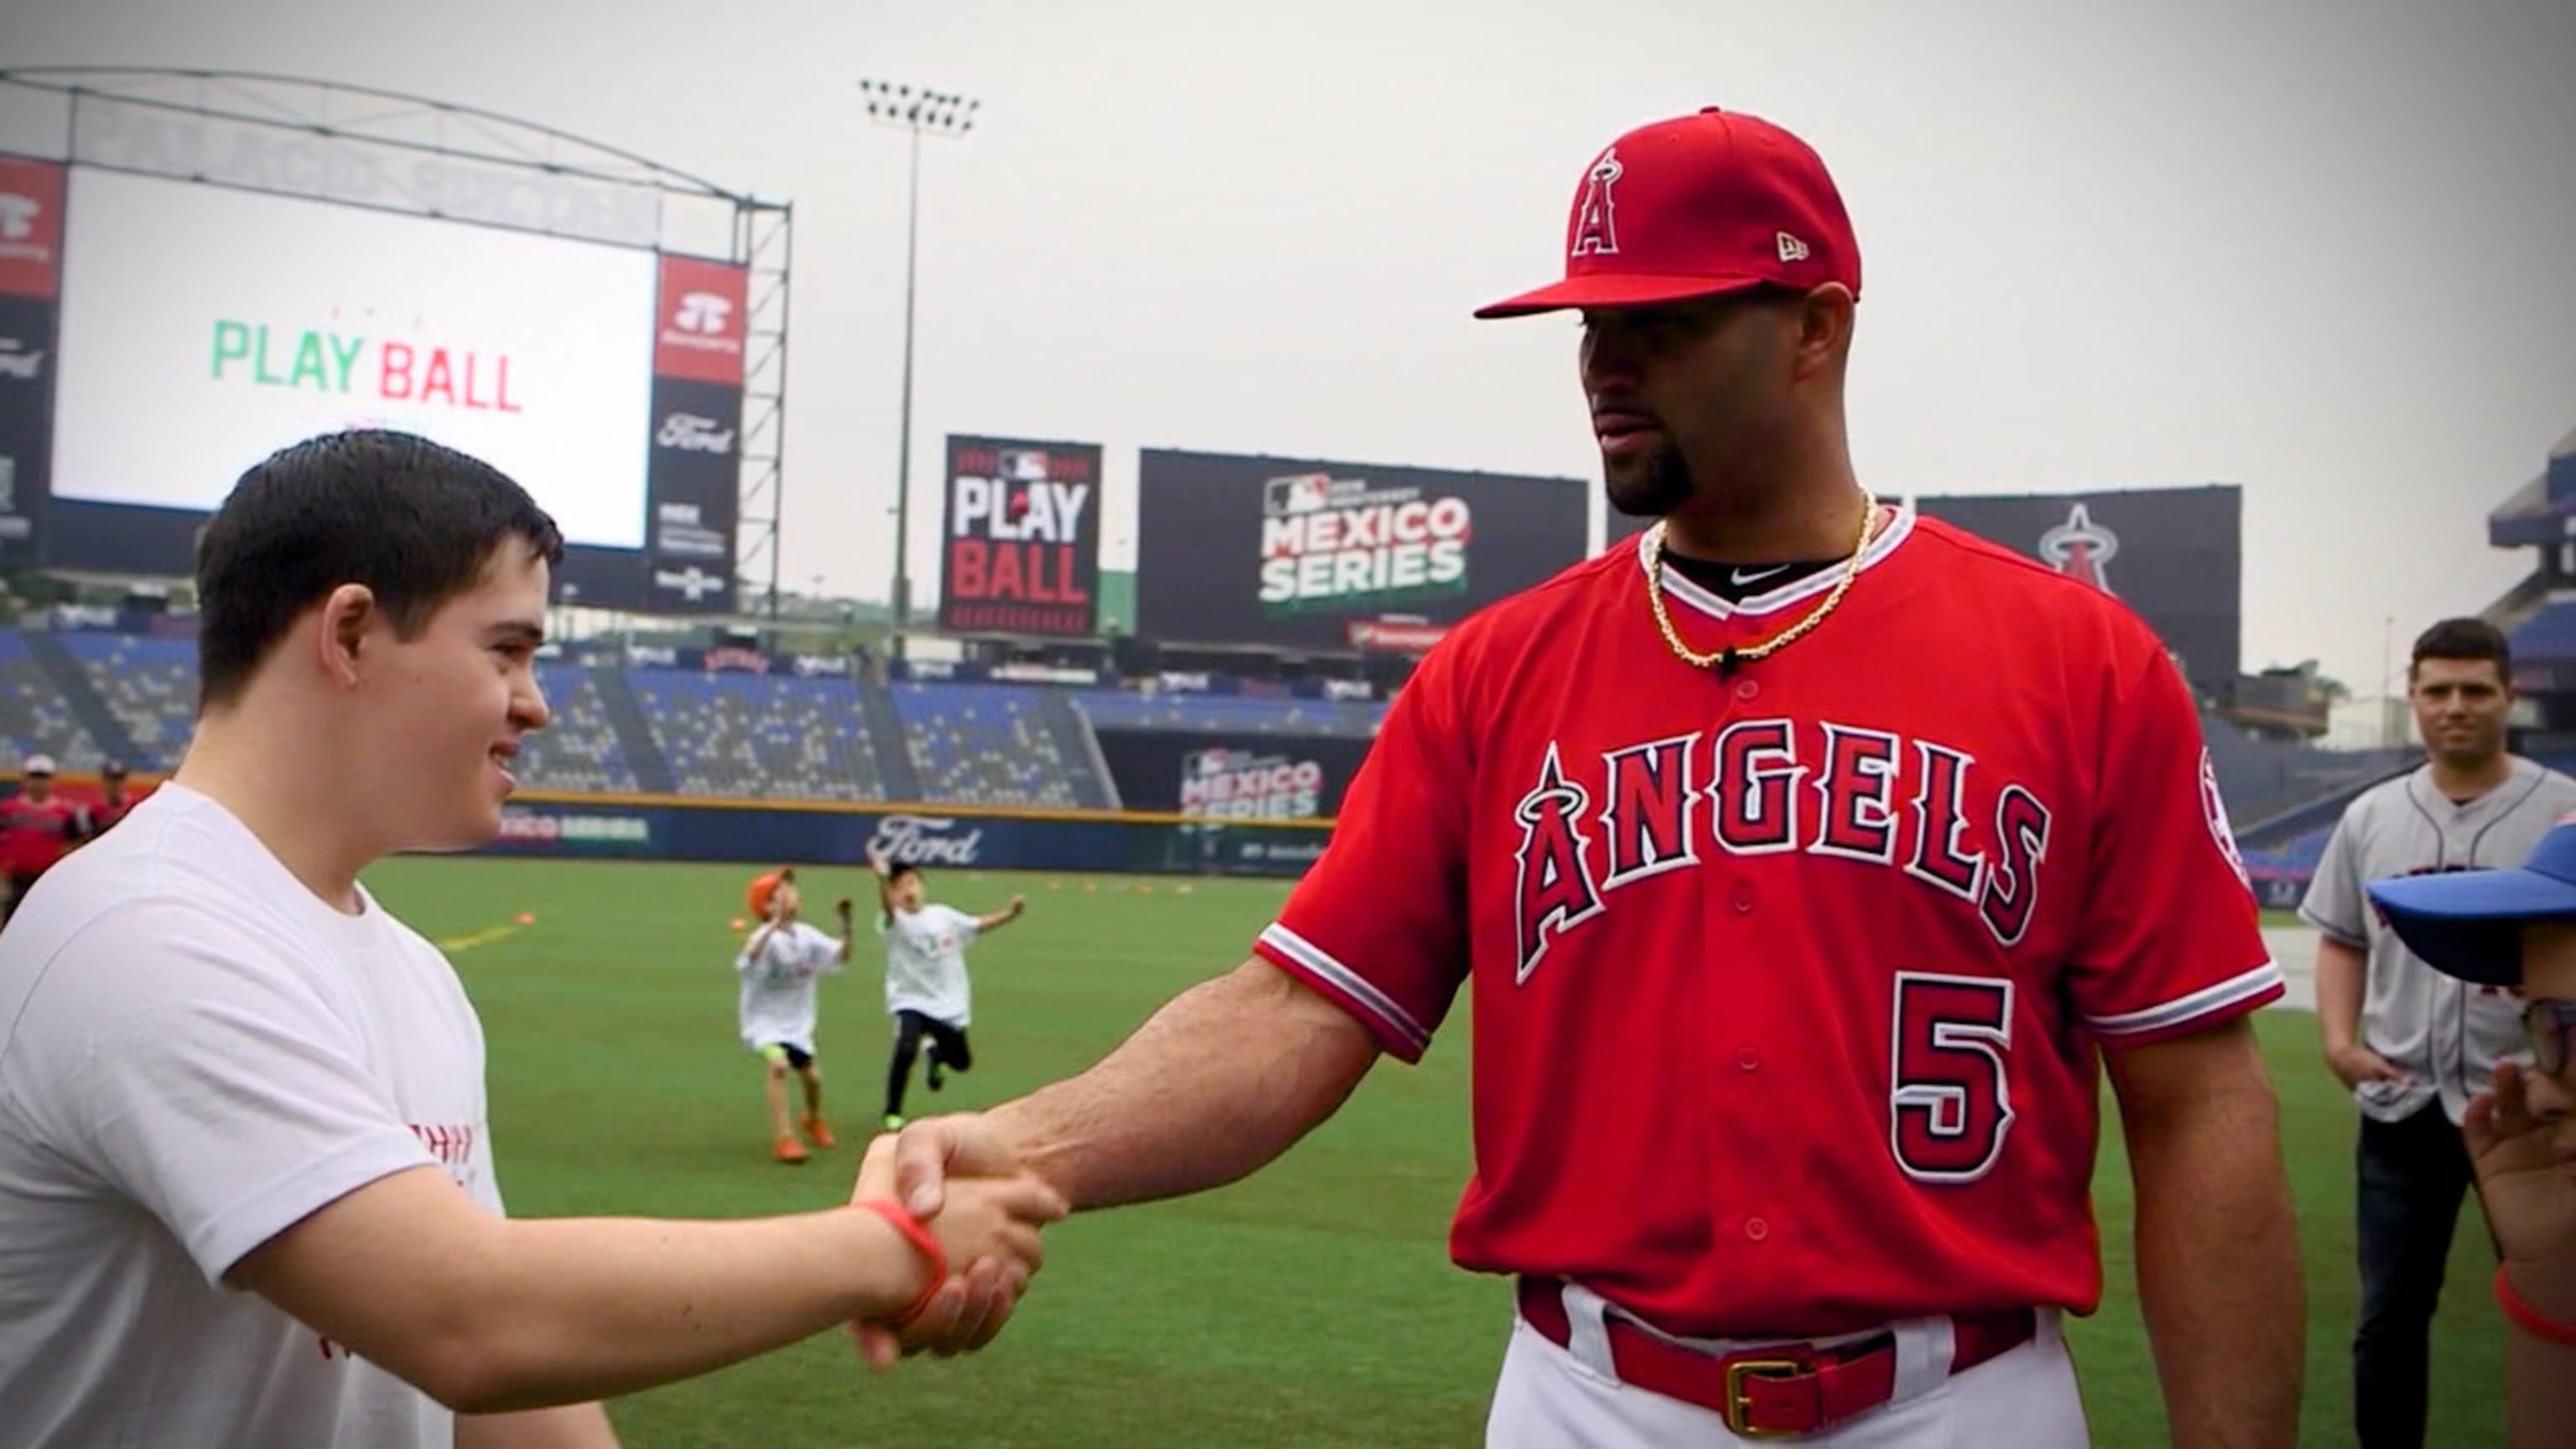 Albert Pujols stays connected with foundation